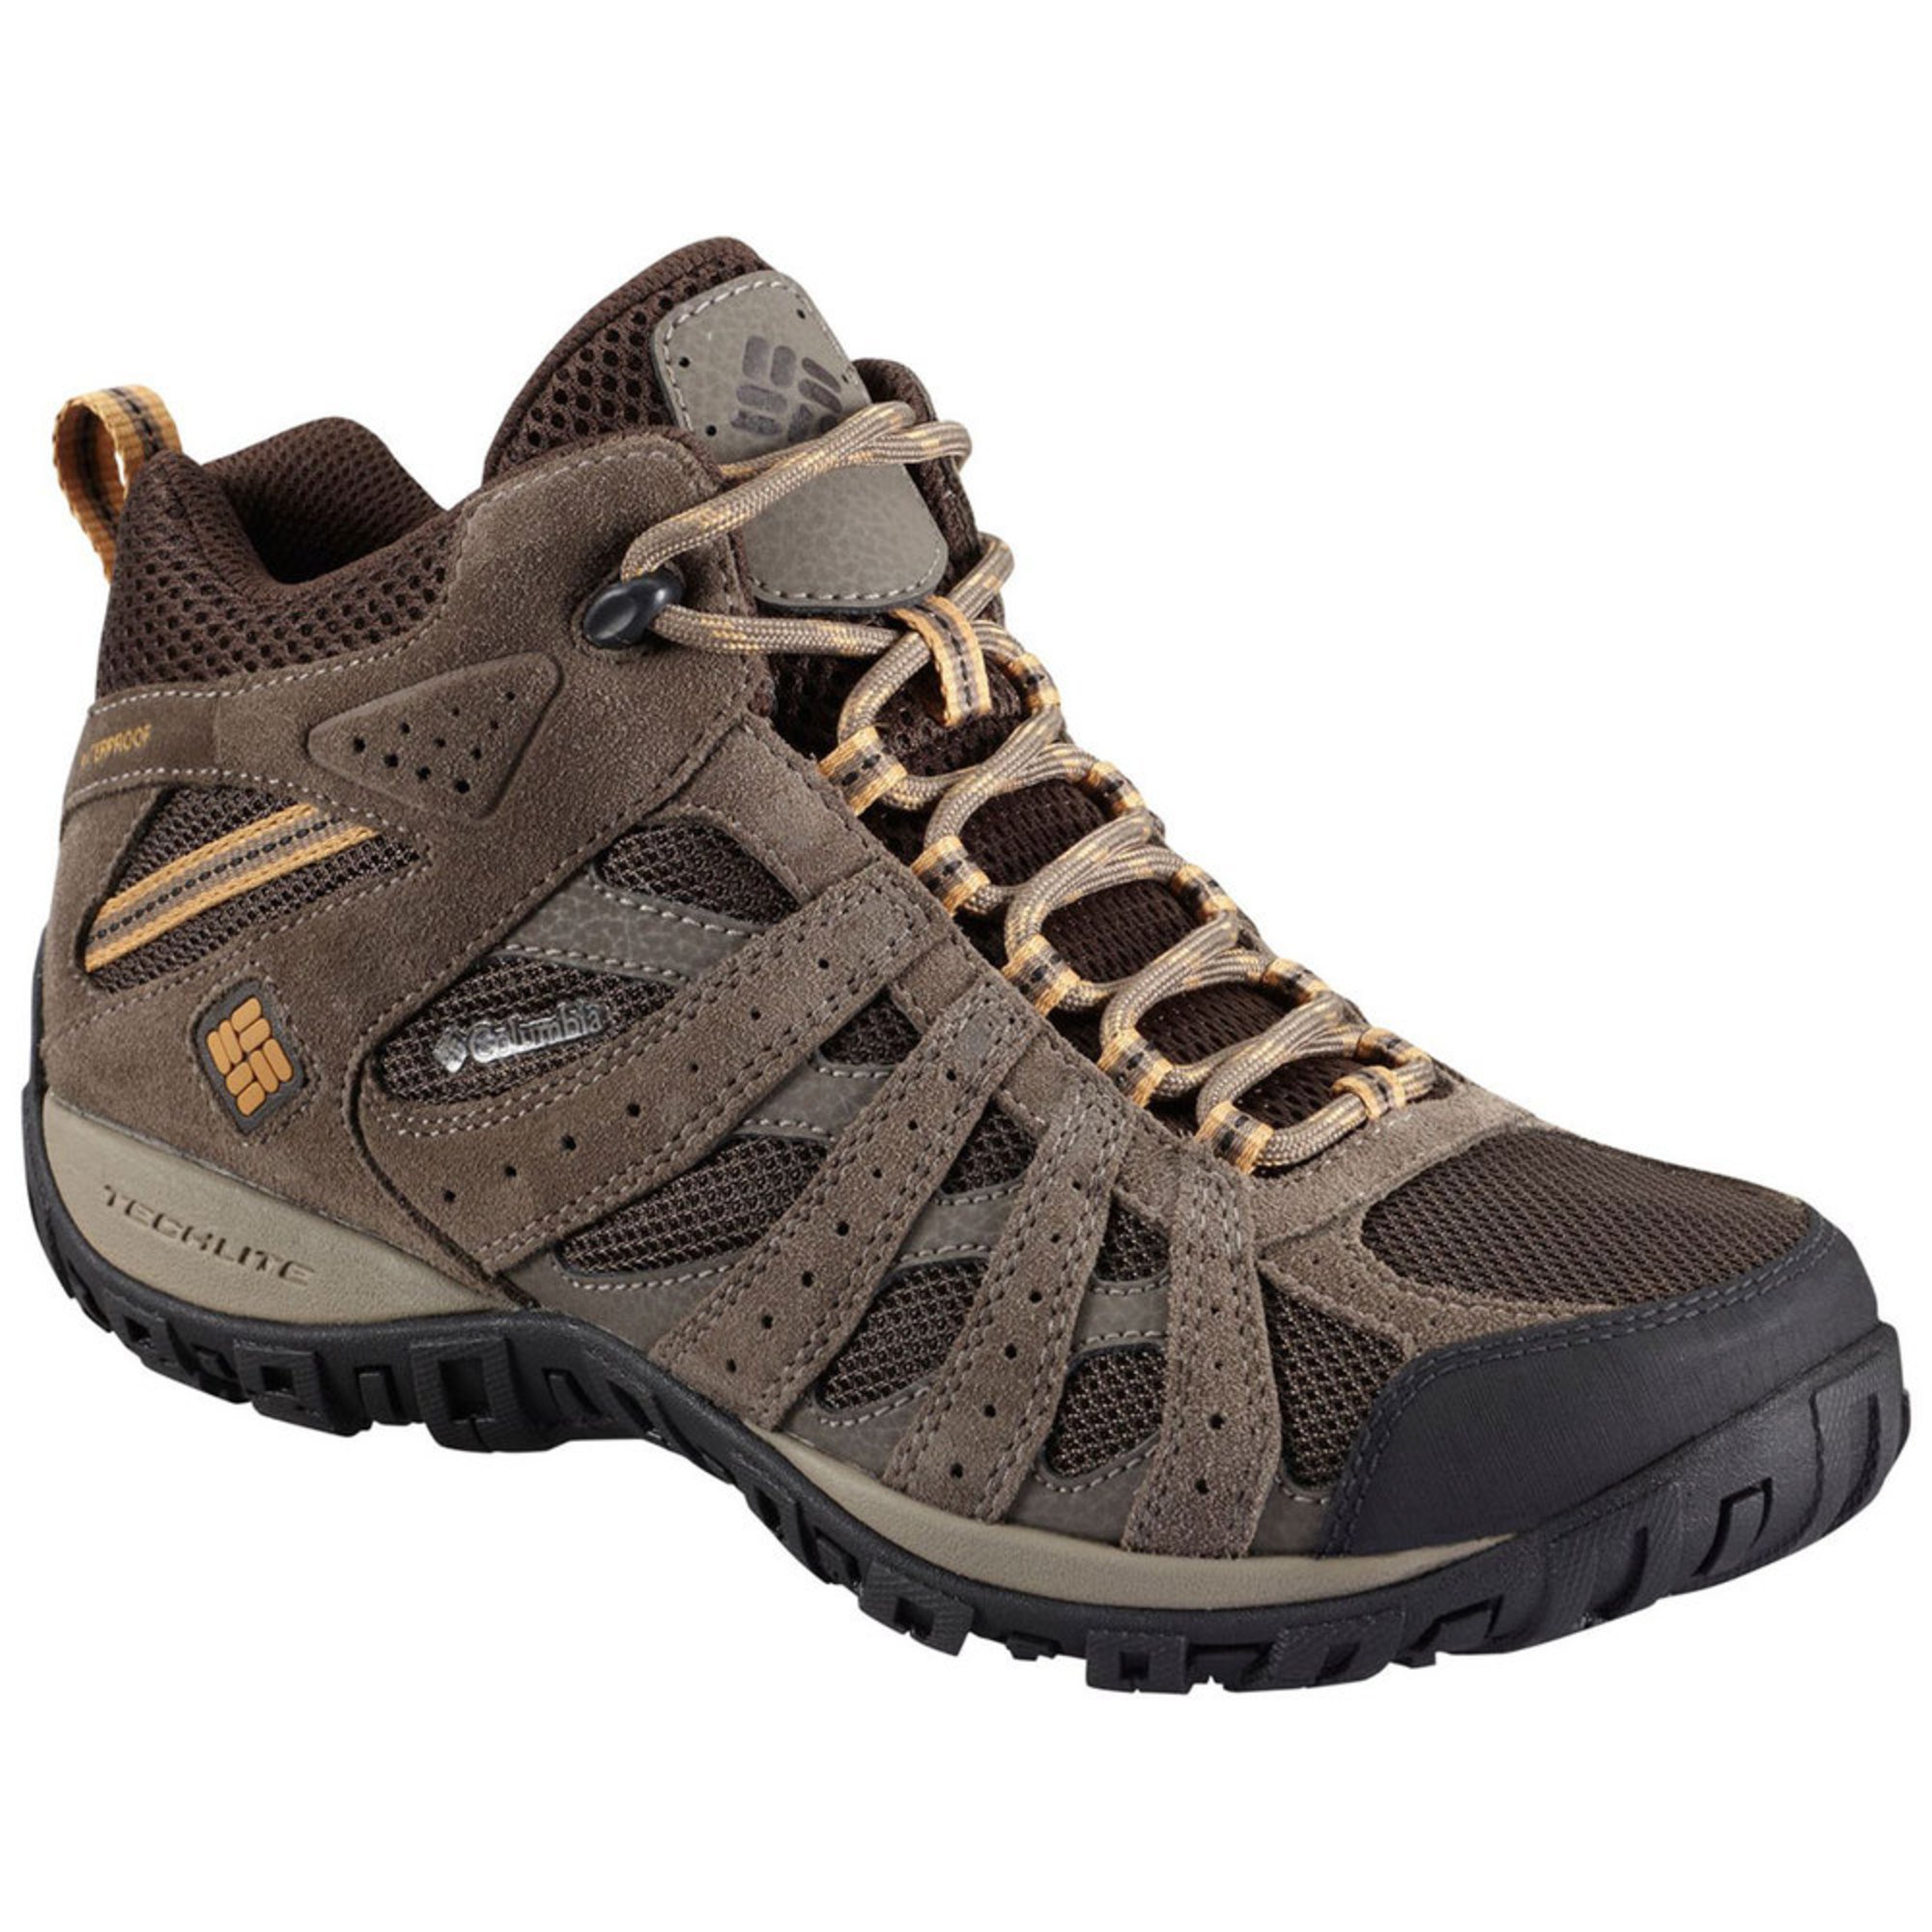 columbia trail shoes